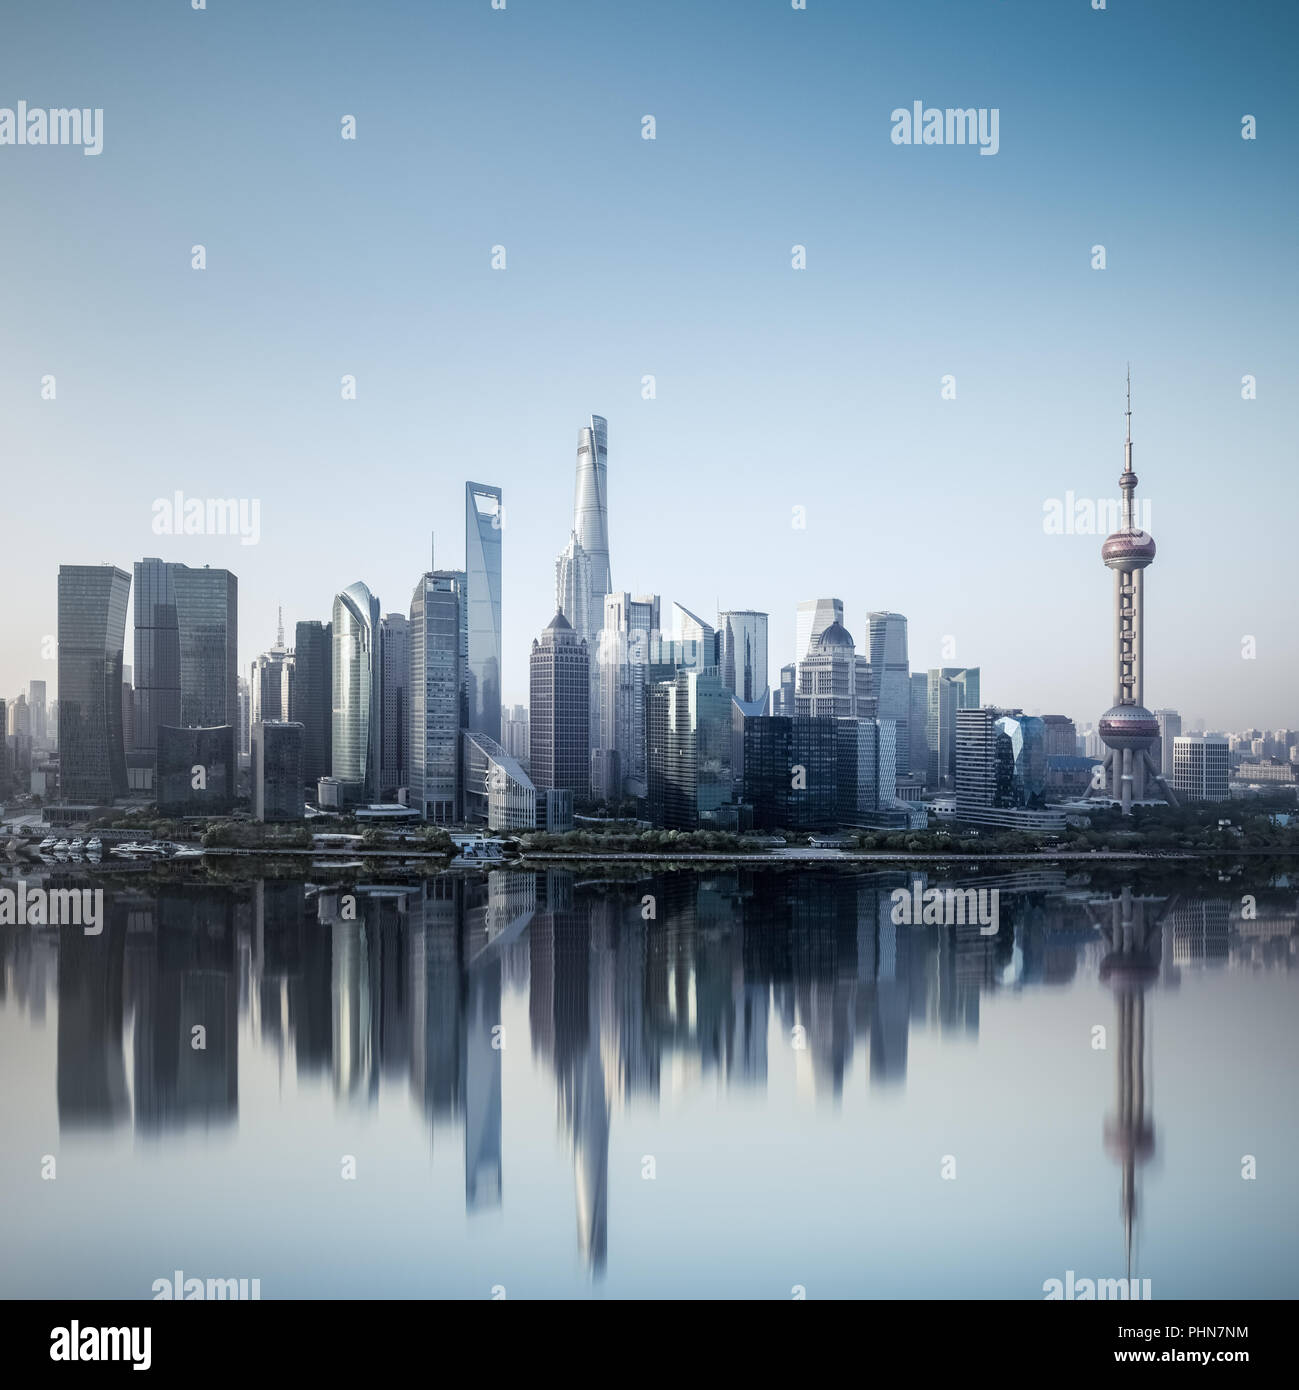 shanghai skyline in morning with reflection Stock Photo